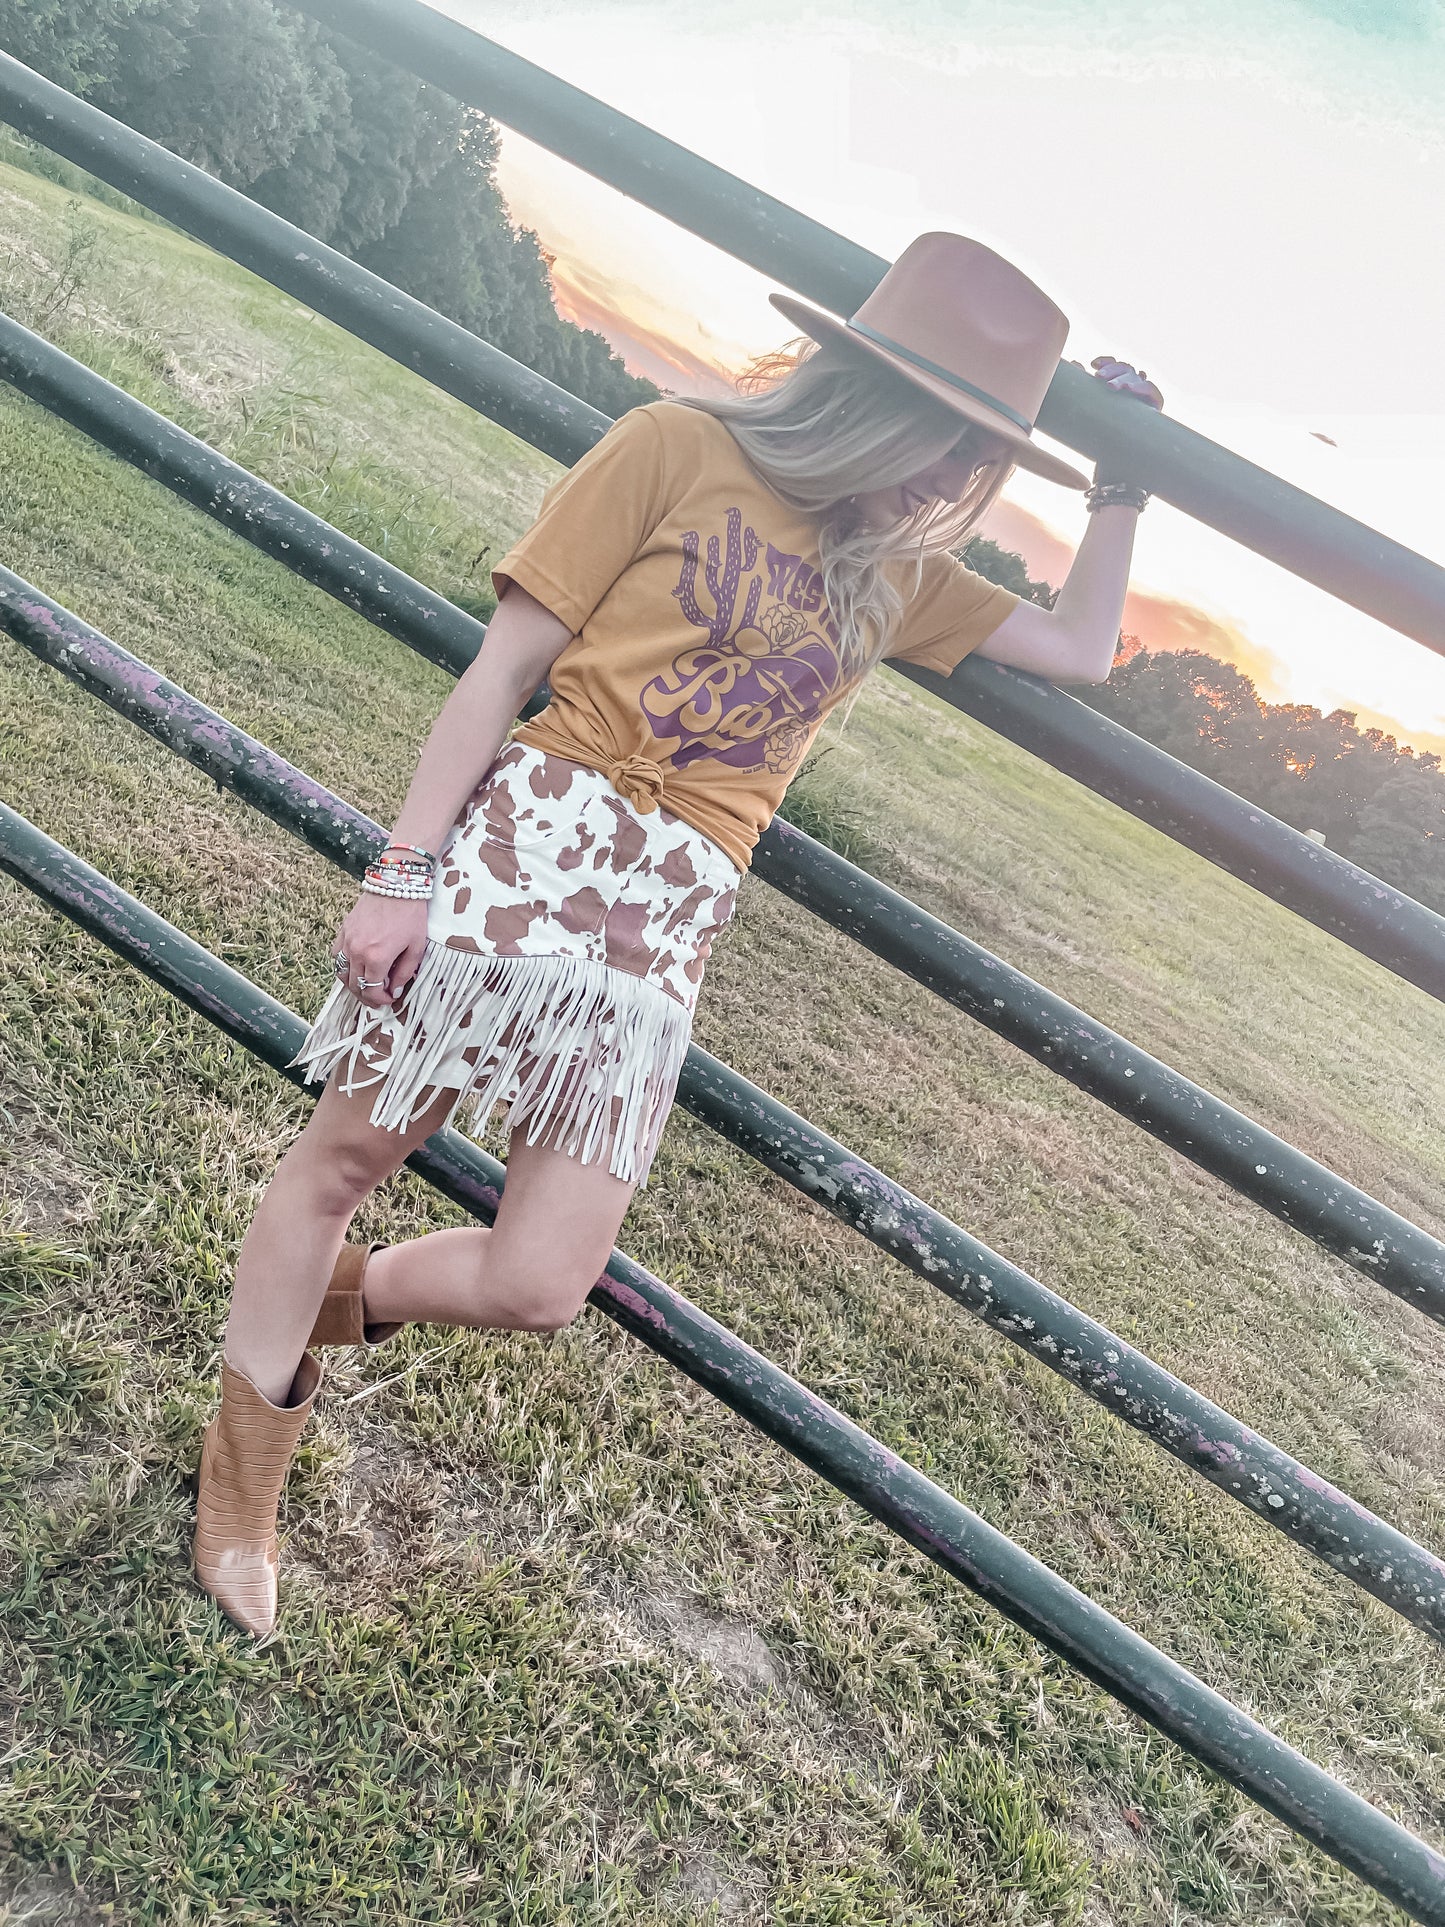 Western Babe Graphic Tee